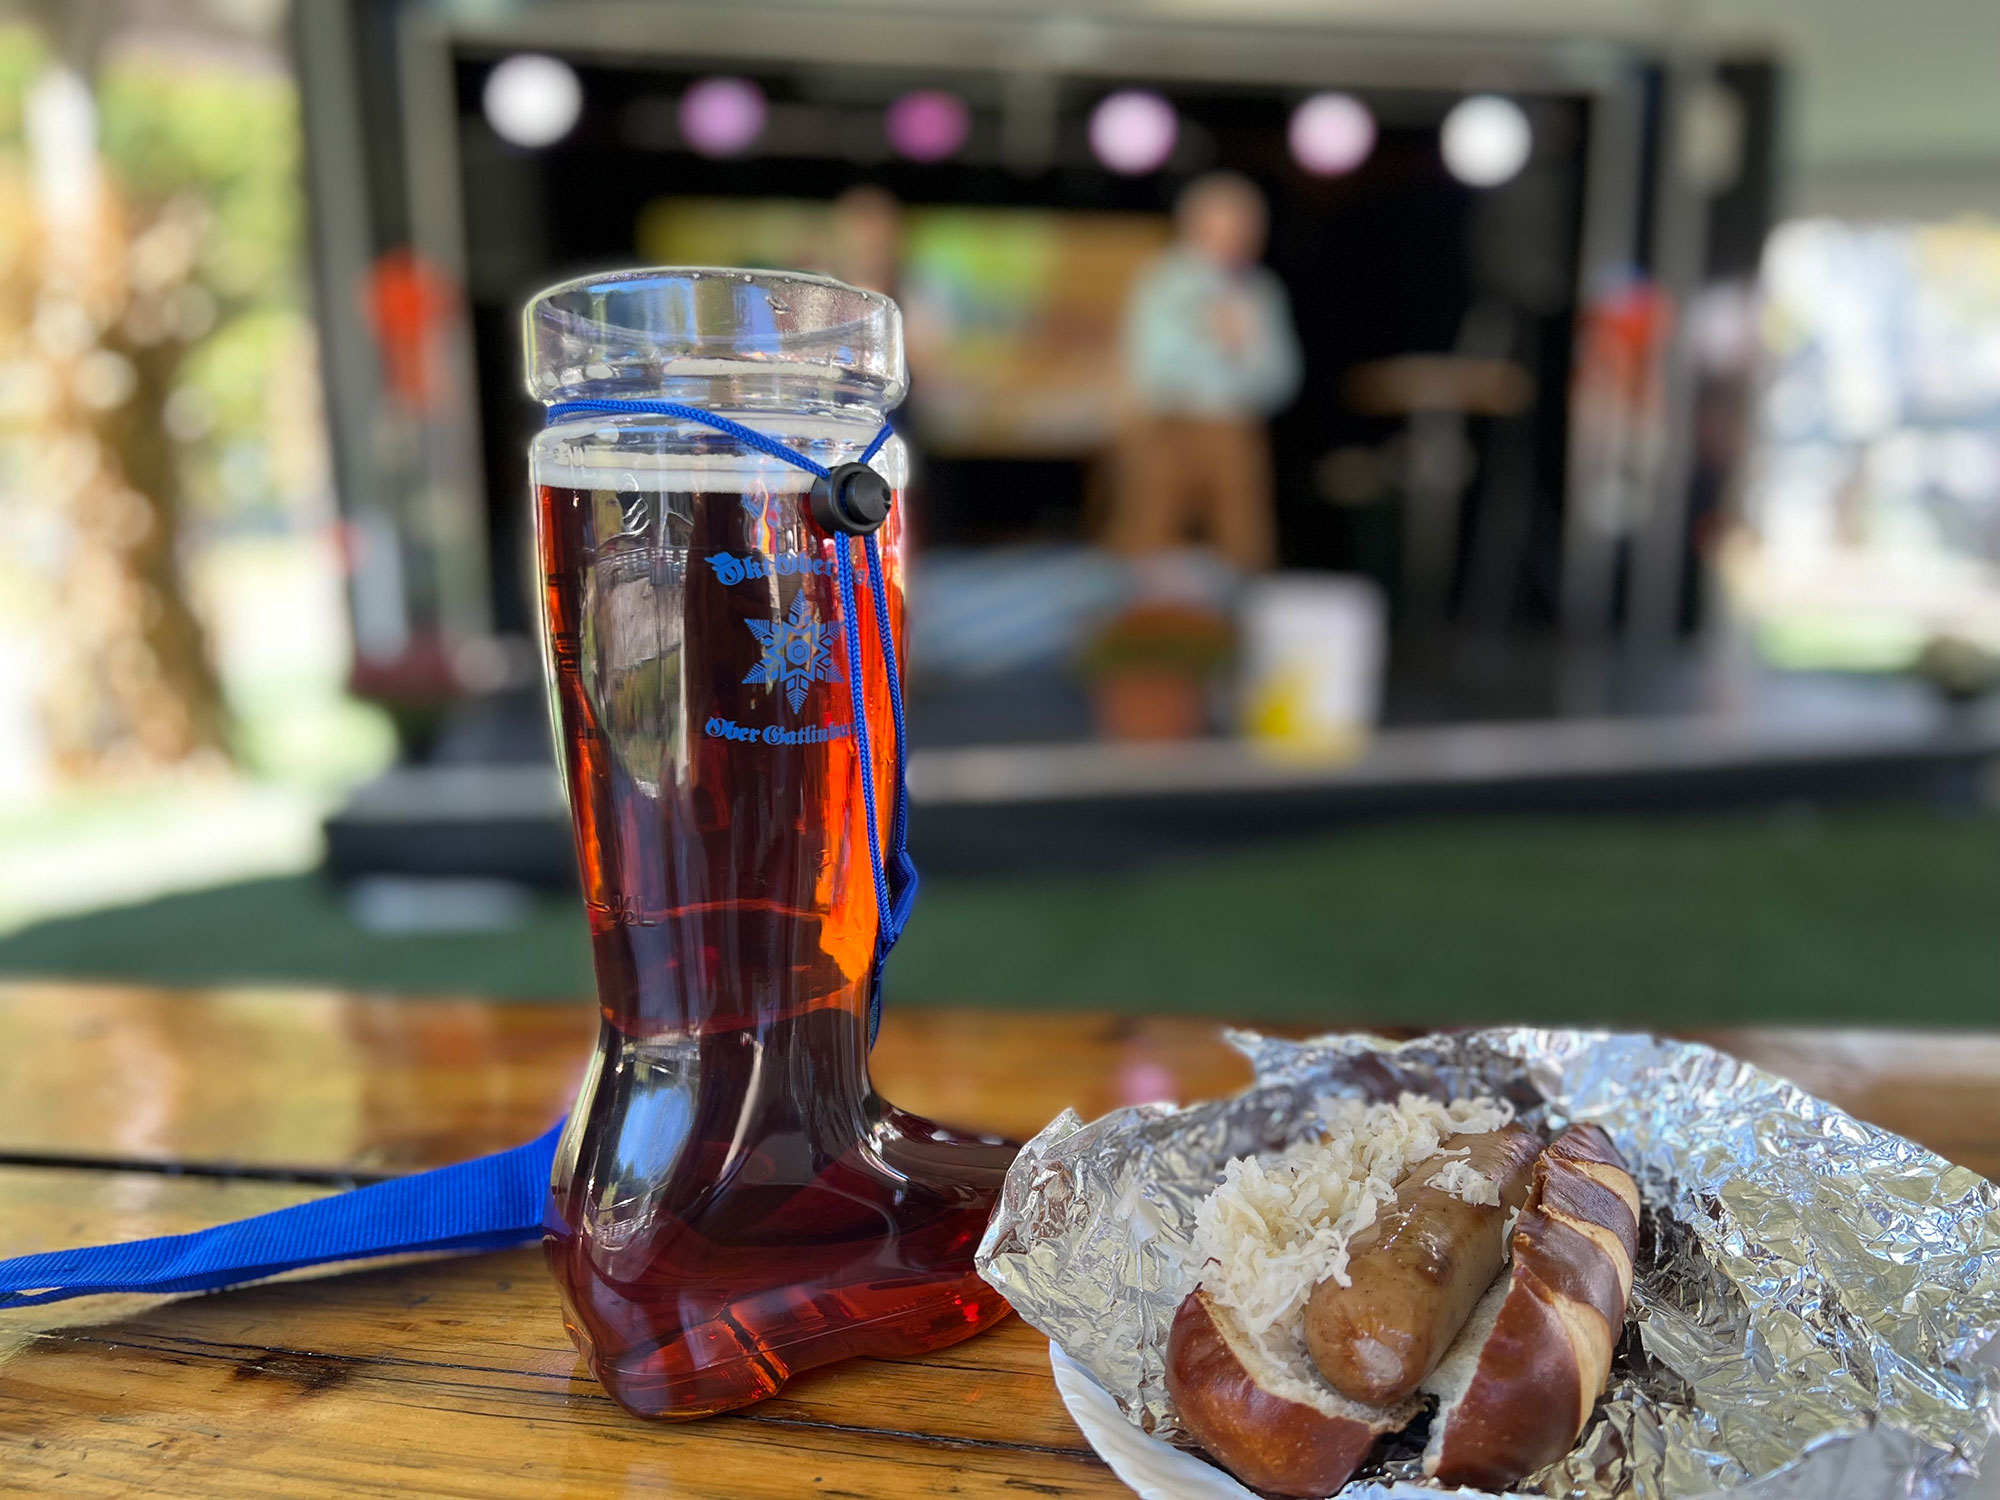 Beer and a brot